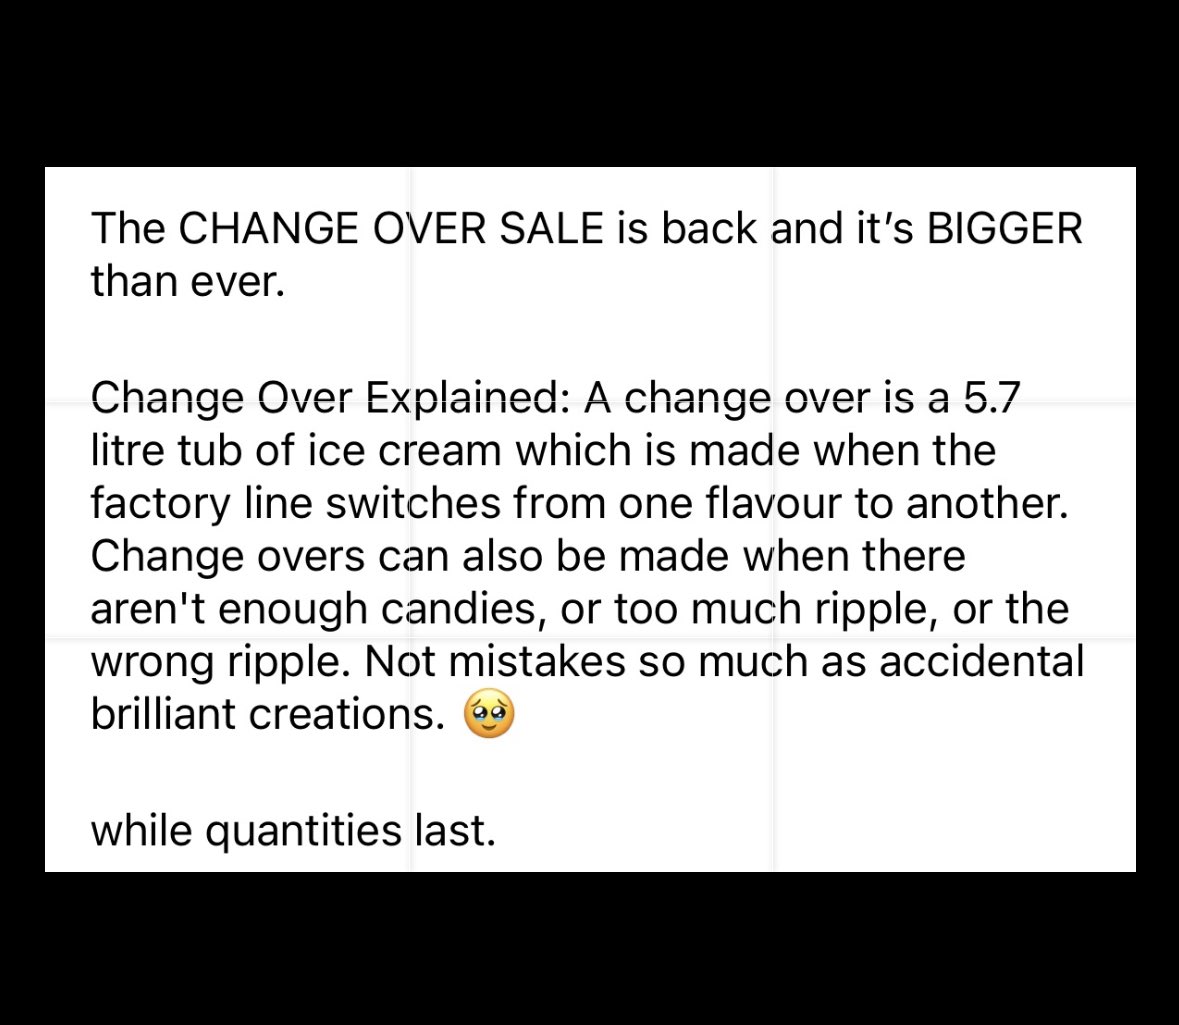 The CHANGE OVER SALE is back and it's BIGGER than ever. A change over is a 5.7 litre tub of ice cream which is made when the factory line switches from one flavour to another. Change overs can also be made when there aren't enough candies, or too much ripple, or the wrong ripple